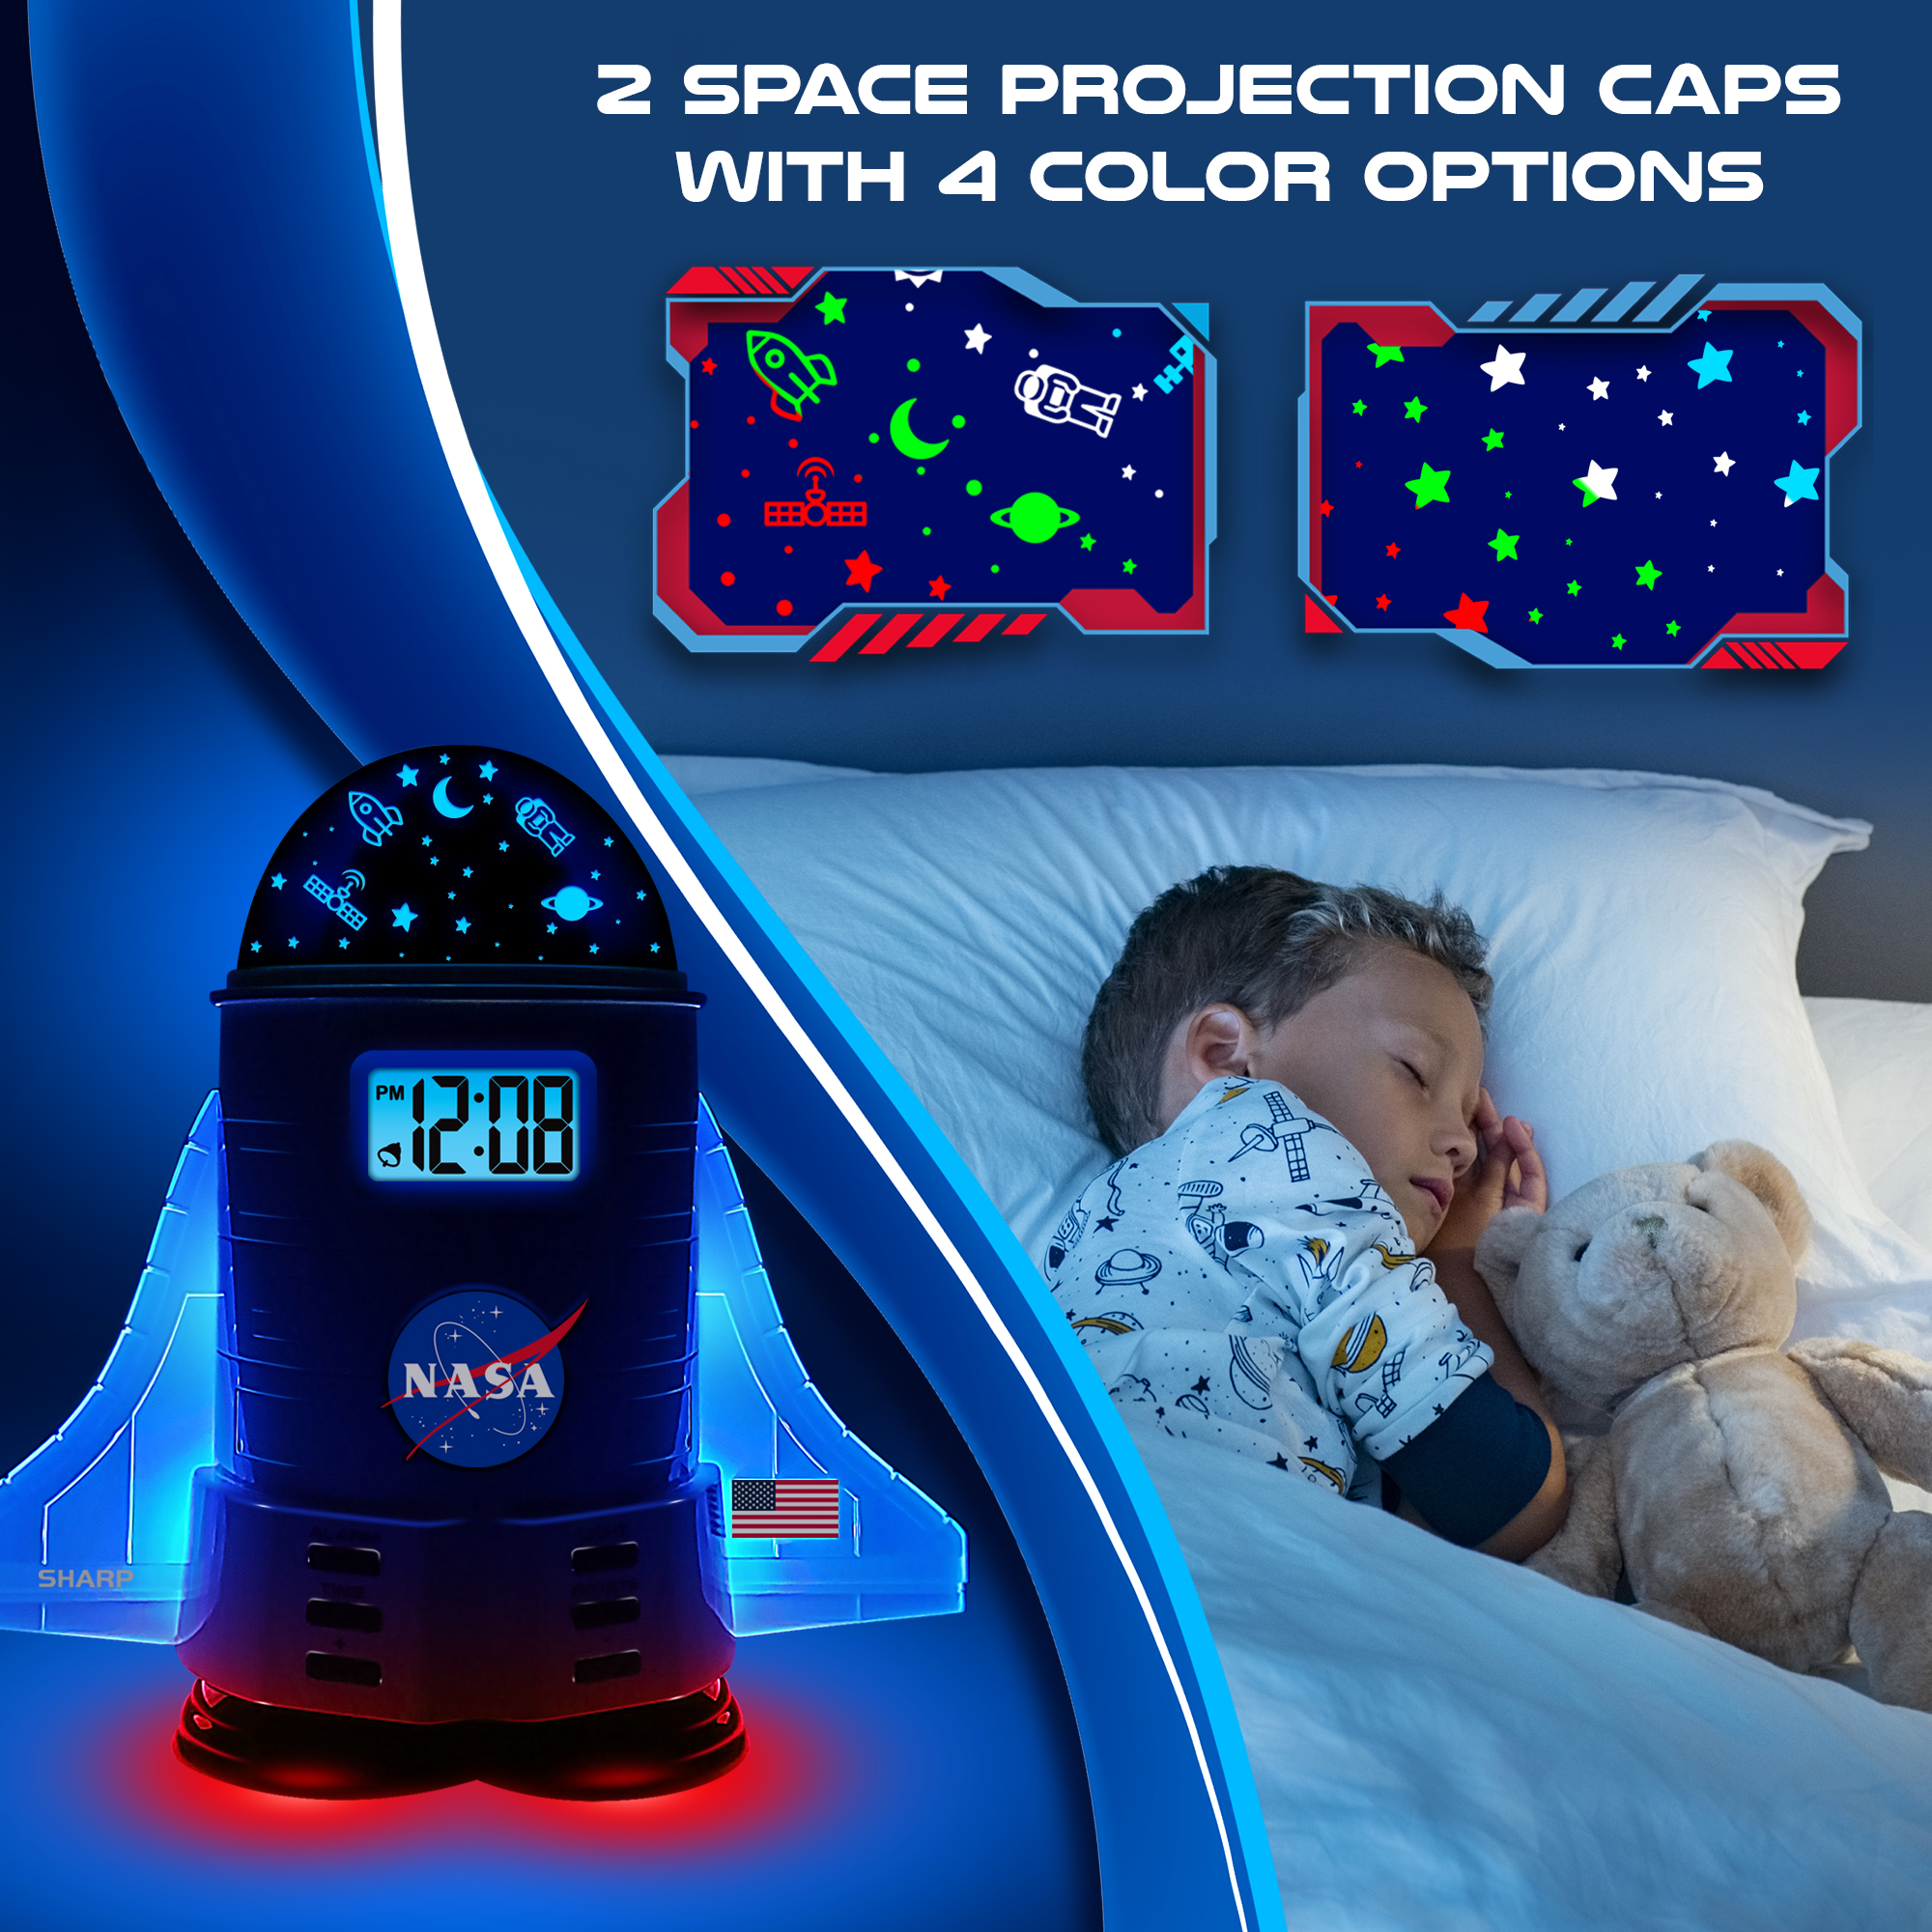 Sharp NASA Space Shuttle Night Light LCD Clock, Nightlight with 4 Color Options, 2 Space Themes - image 4 of 8